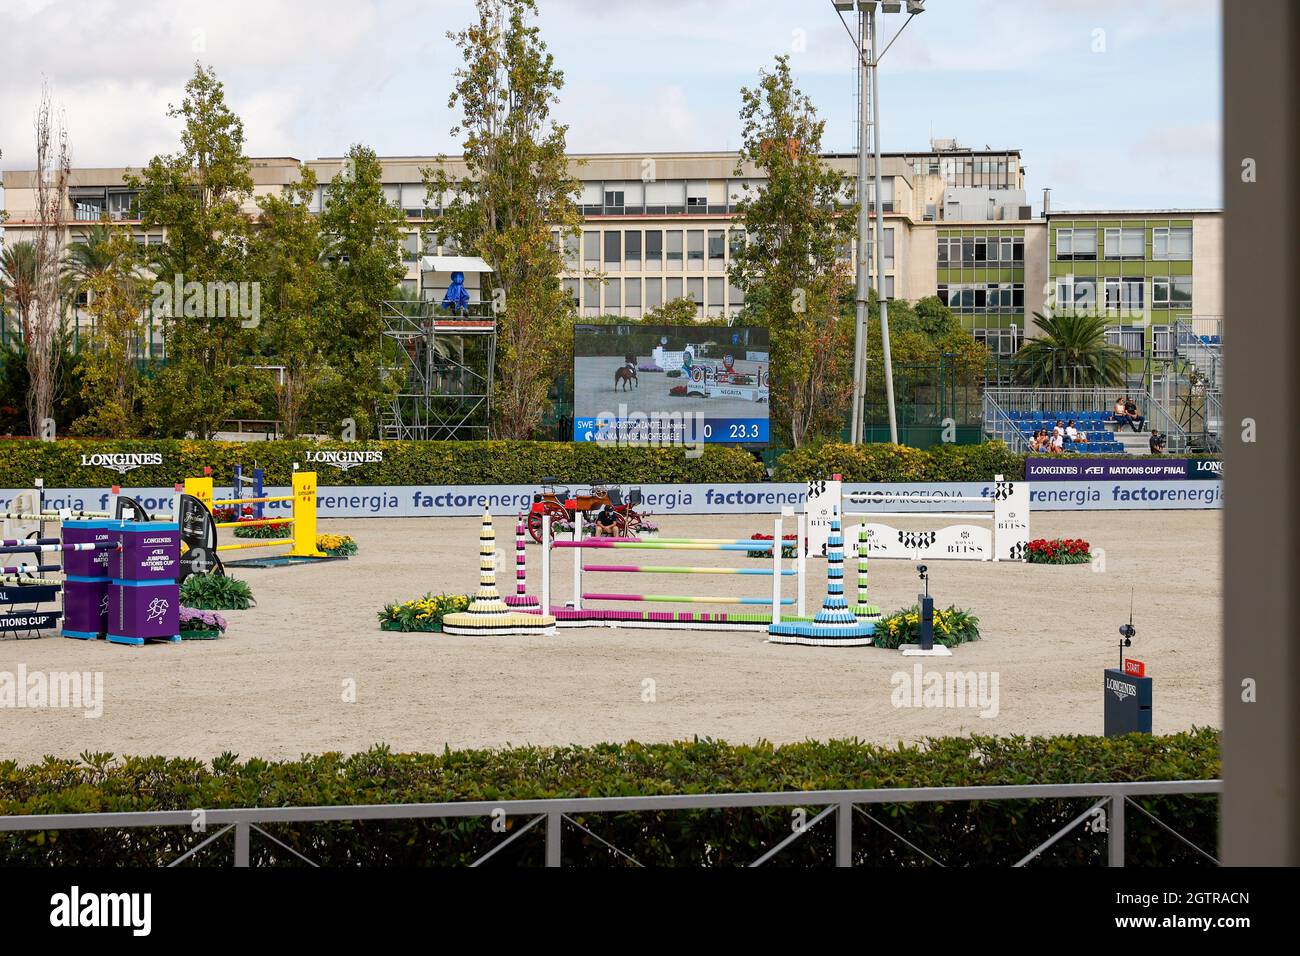 Real Club de Polo during the CSIO Barcelona: Longines FEI jumping Nations  Cup at Real Club de Polo of Barcelona Stock Photo - Alamy